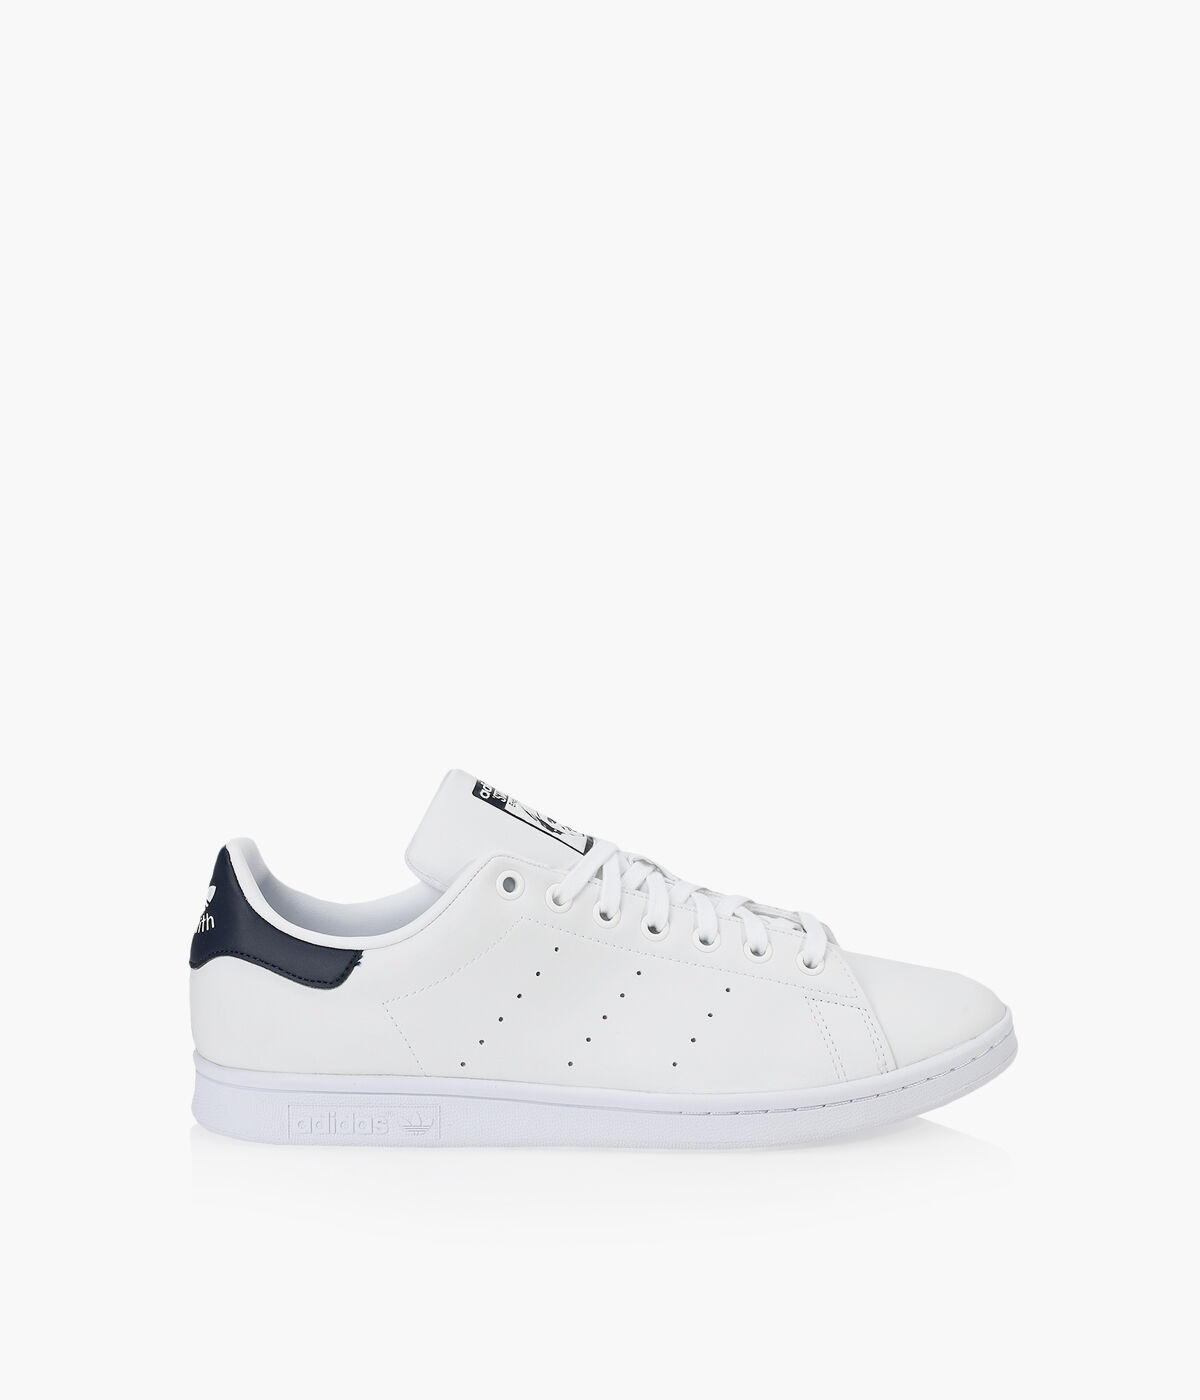 Buy ADIDAS Originals Men White STAN SMITH Sneakers - Casual Shoes for Men  1775064 | Myntra